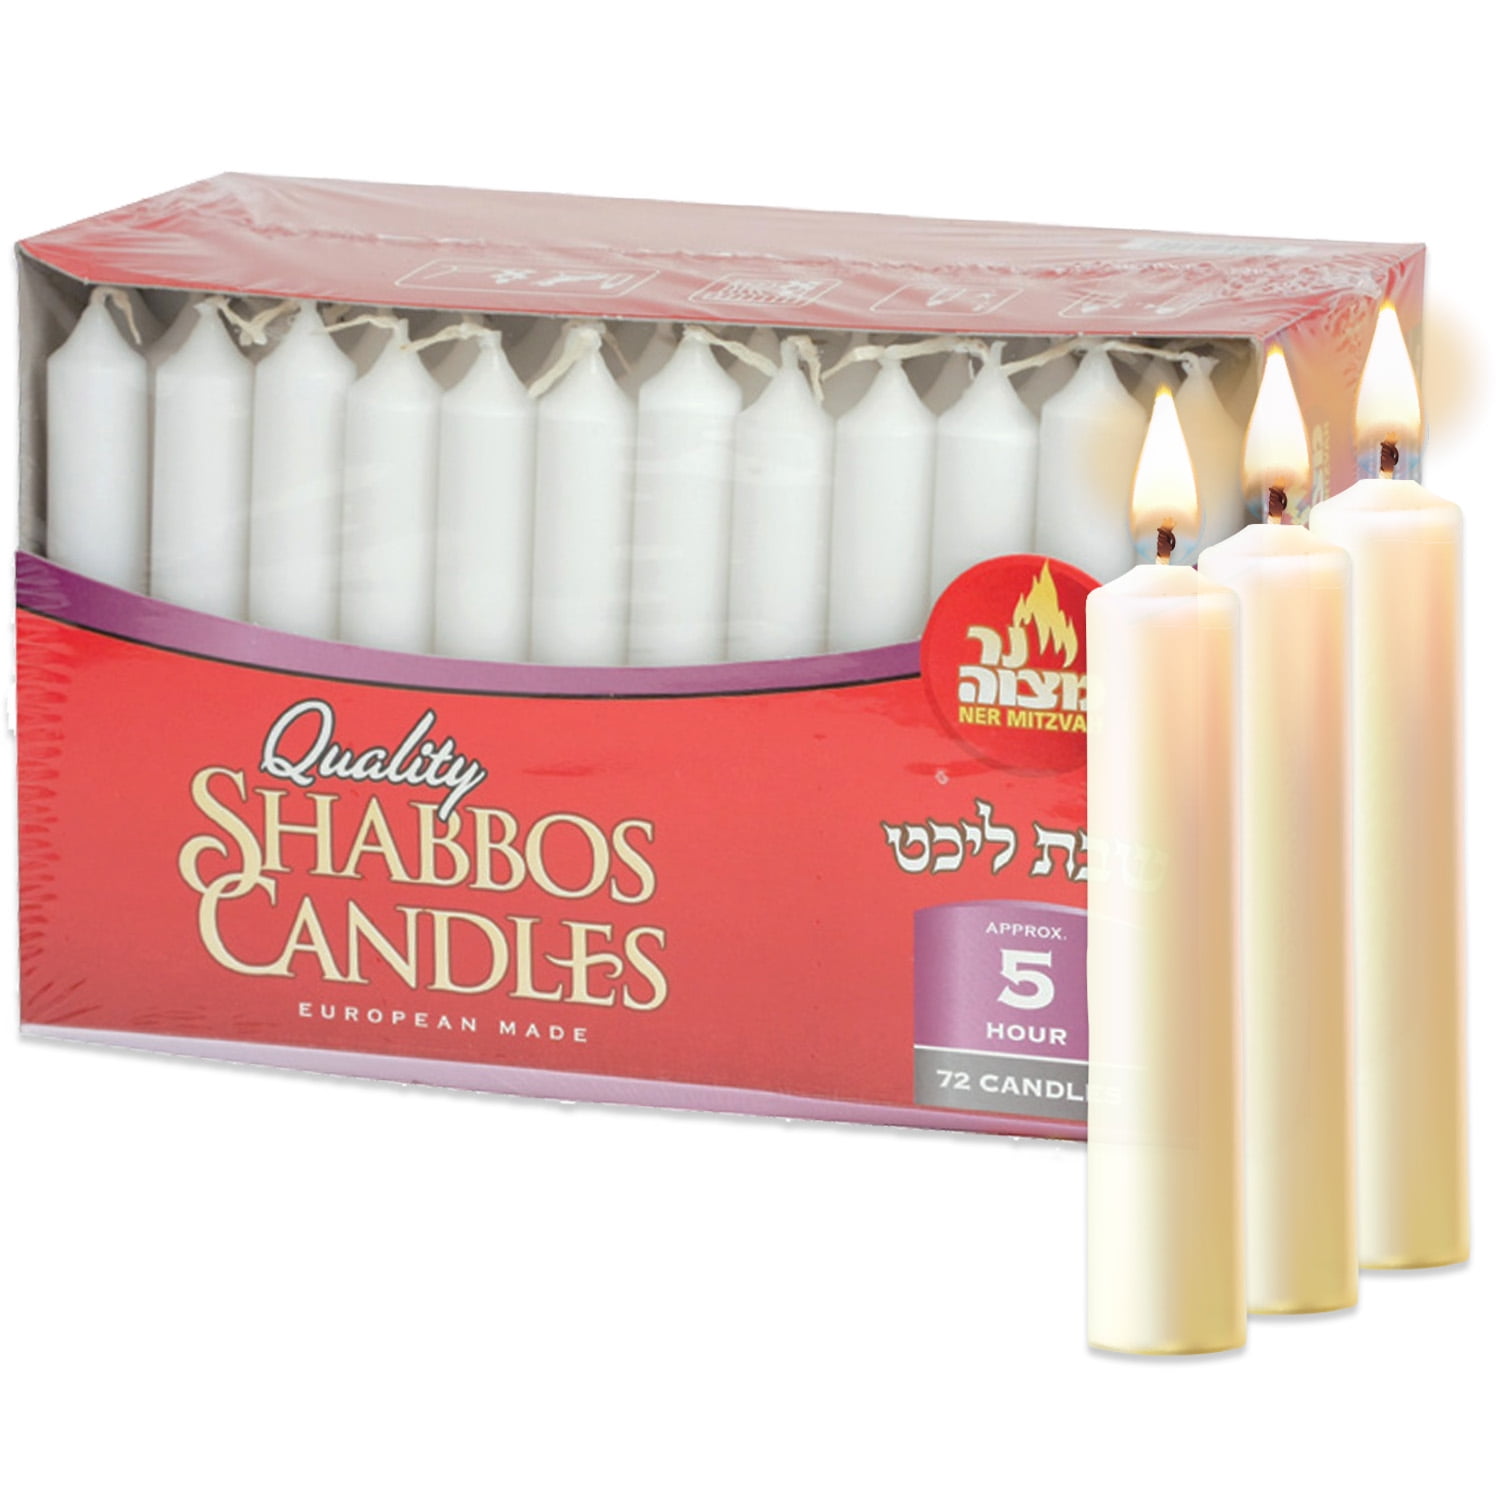 Shabbos Candles Candle 72 Per Box 2 boxes of White Sabbath 